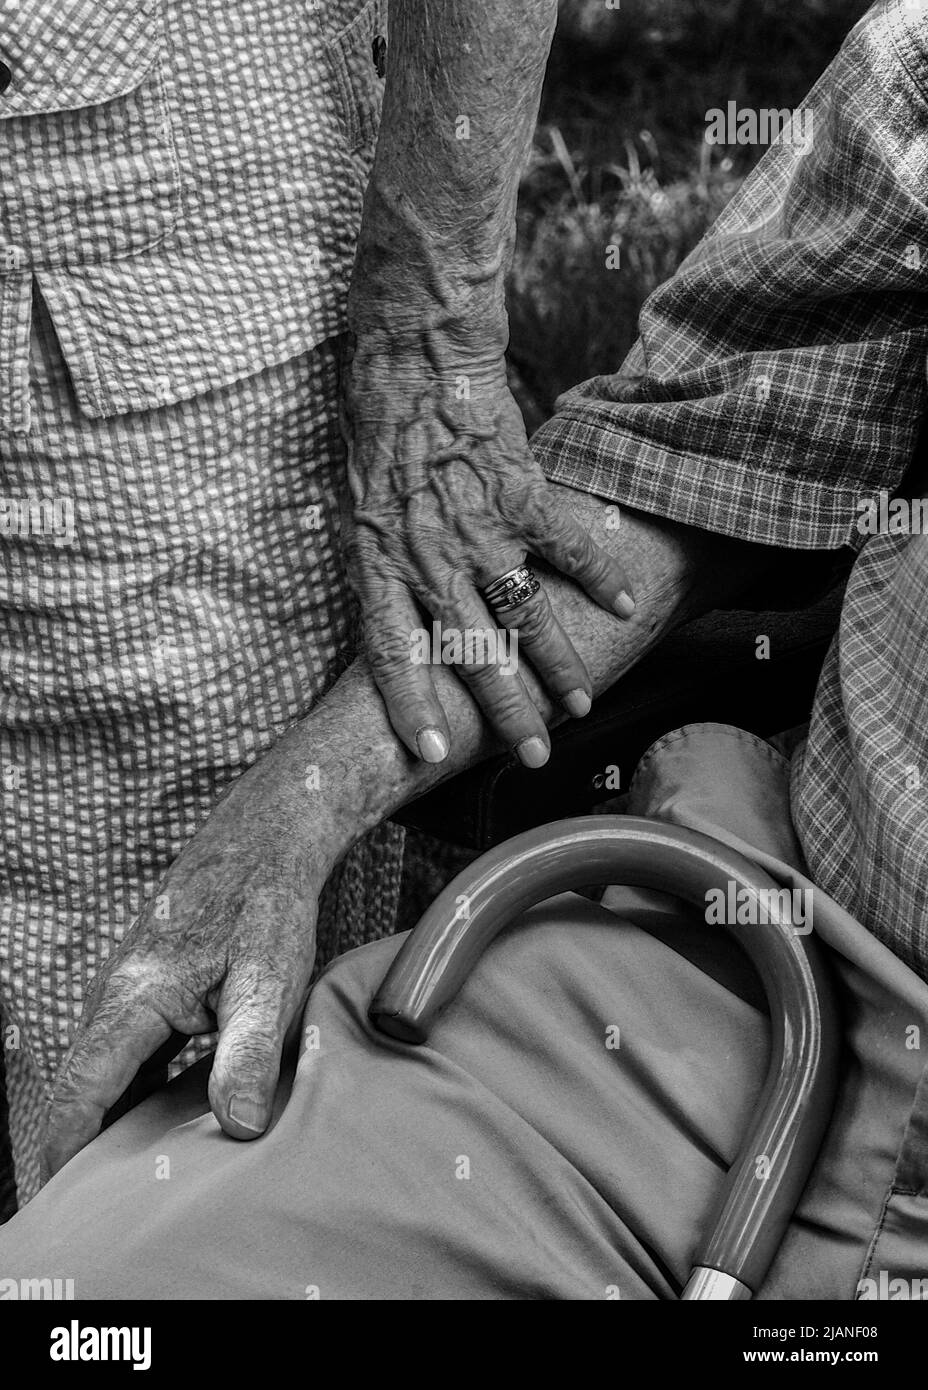 Older woman standing with hand on husband's arm Stock Photo